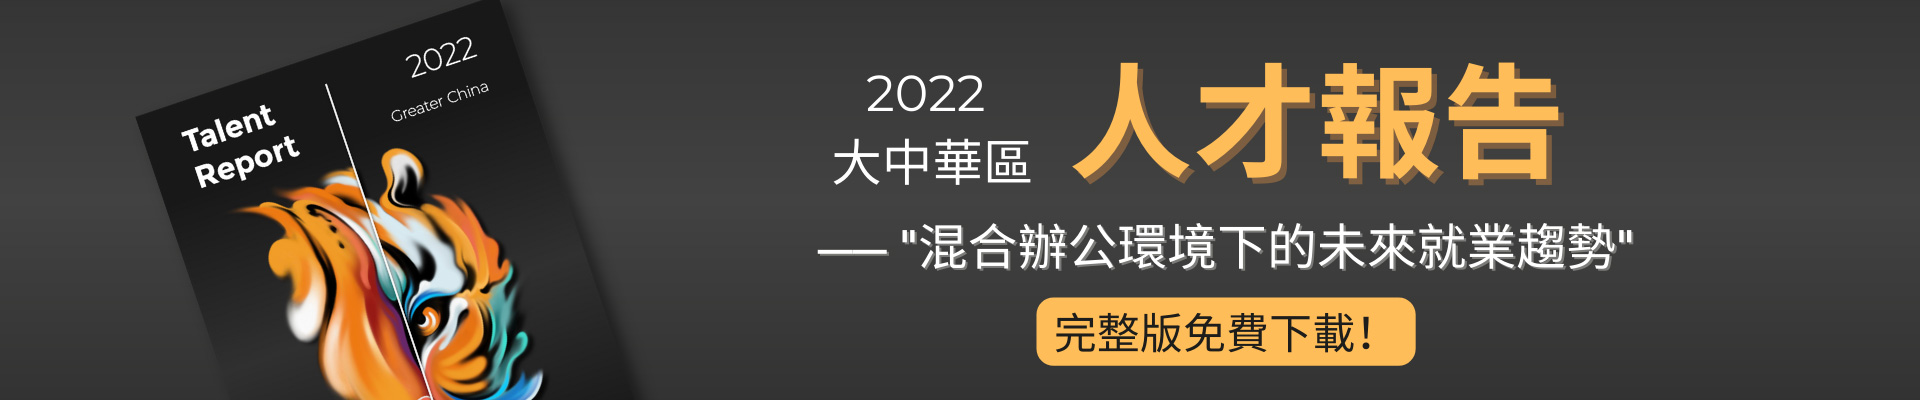 Talent Rerort Greater China 2022